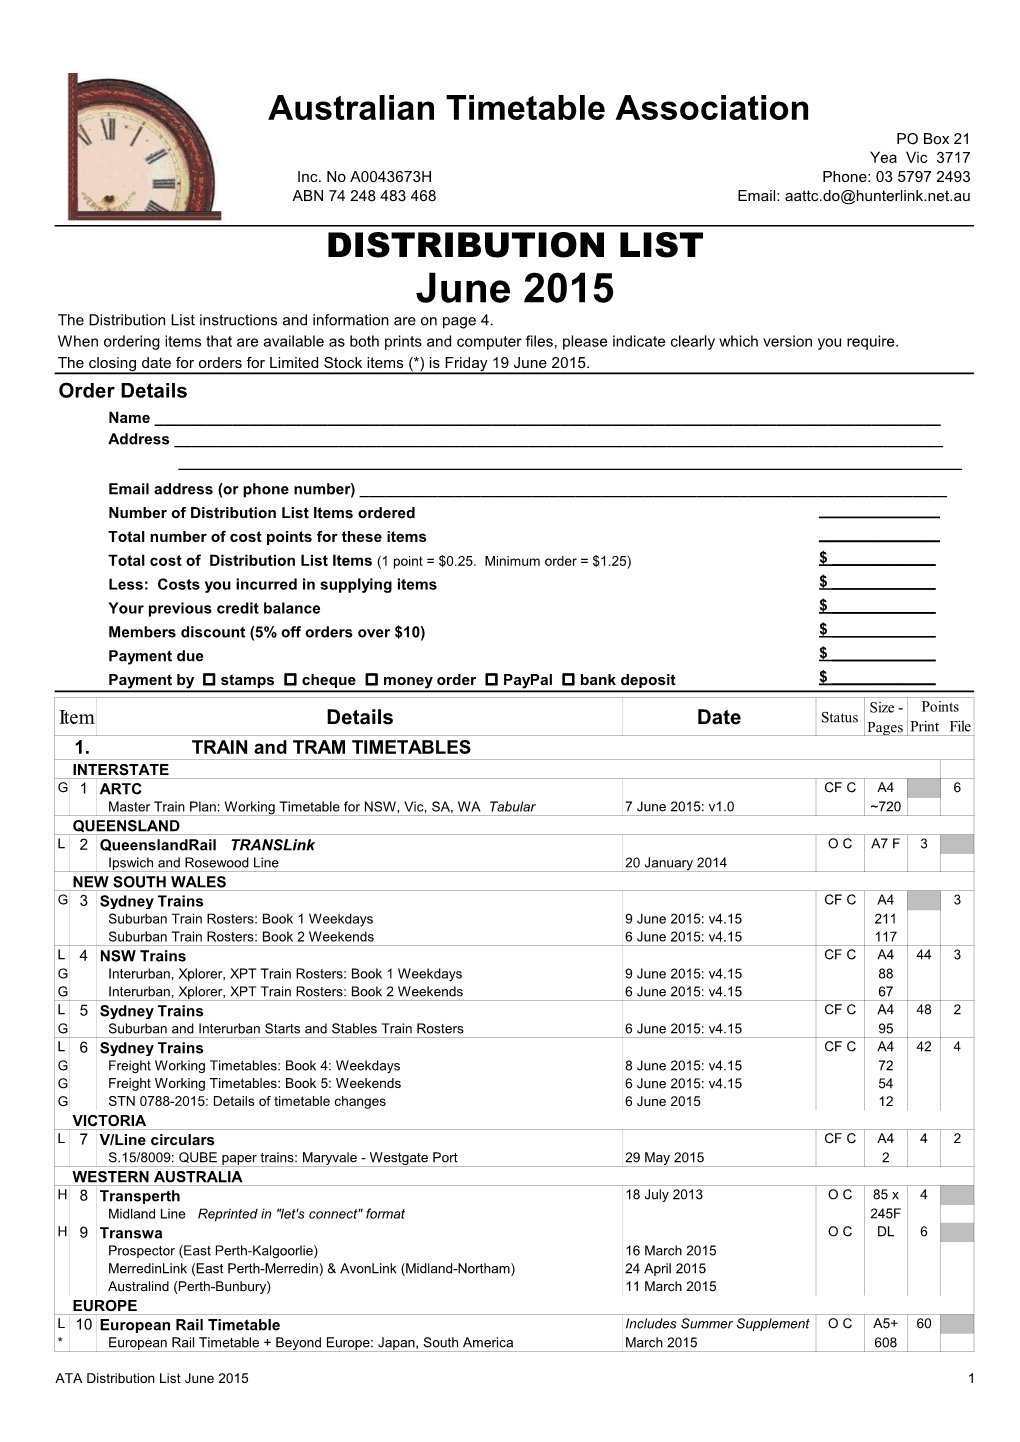 June 2015 the Distribution List Instructions and Information Are on Page 4